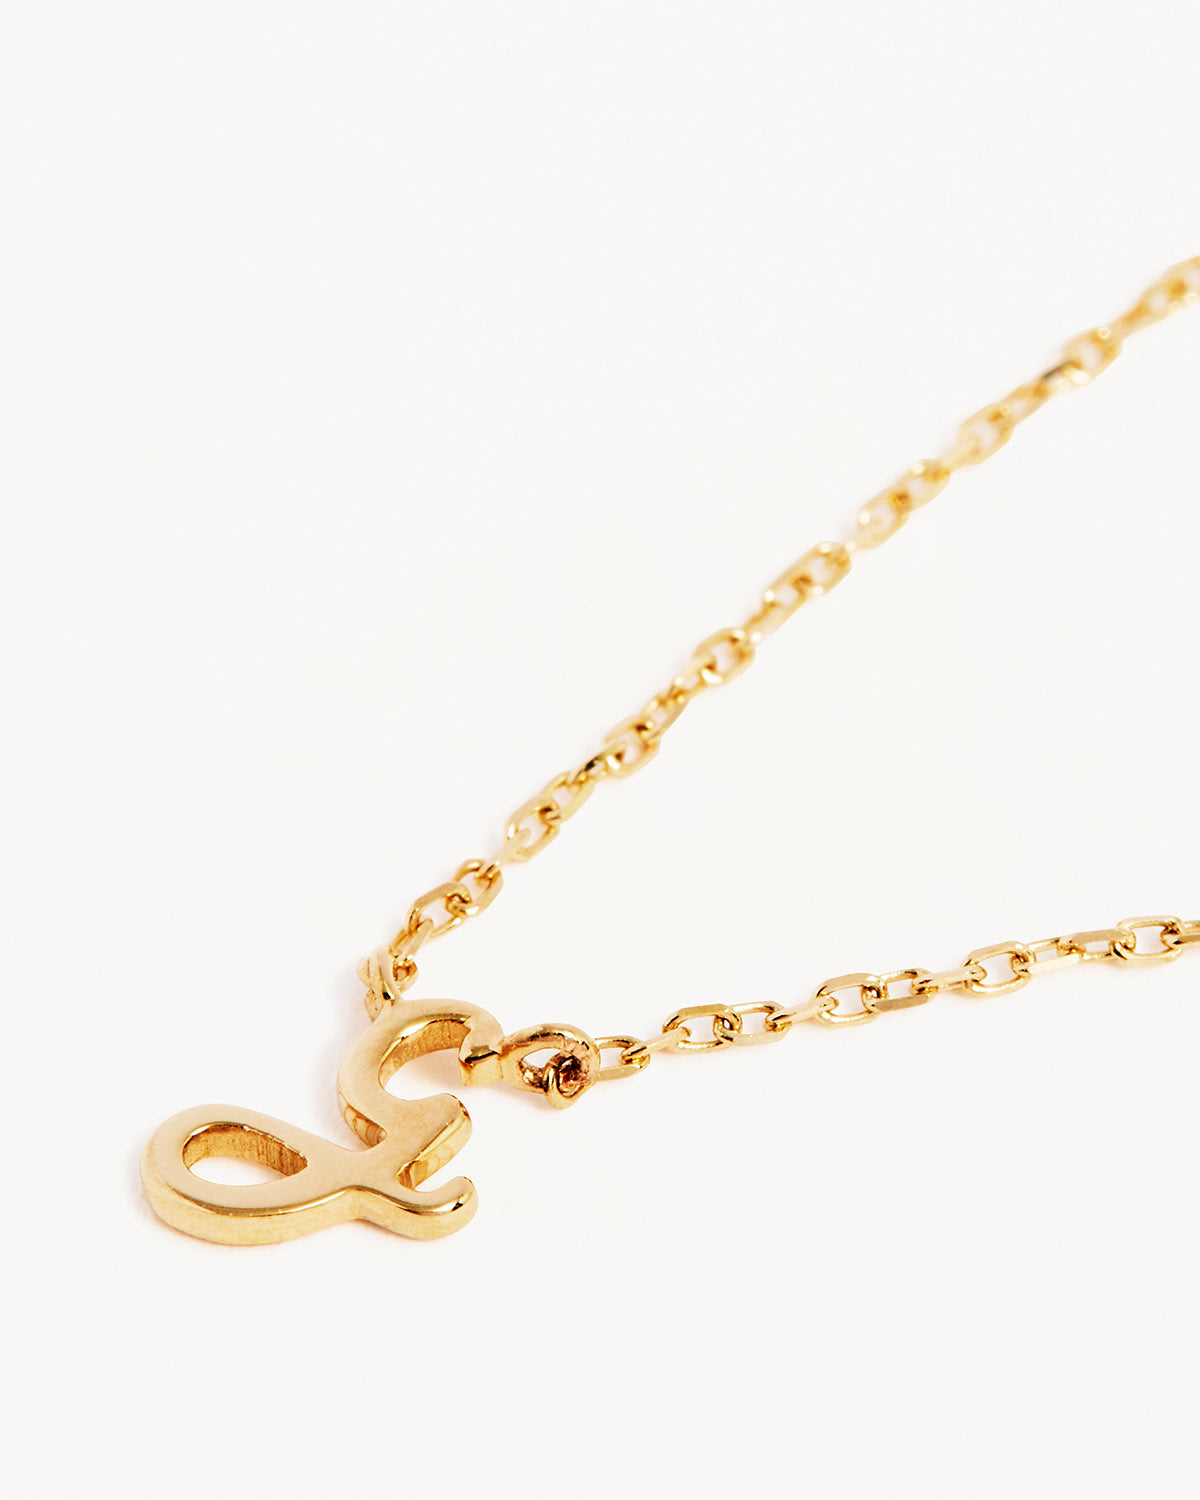 Crystal Gold Tone Letter S Love Heart necklace | Initial heart necklace,  Love necklace, Crystal heart necklace